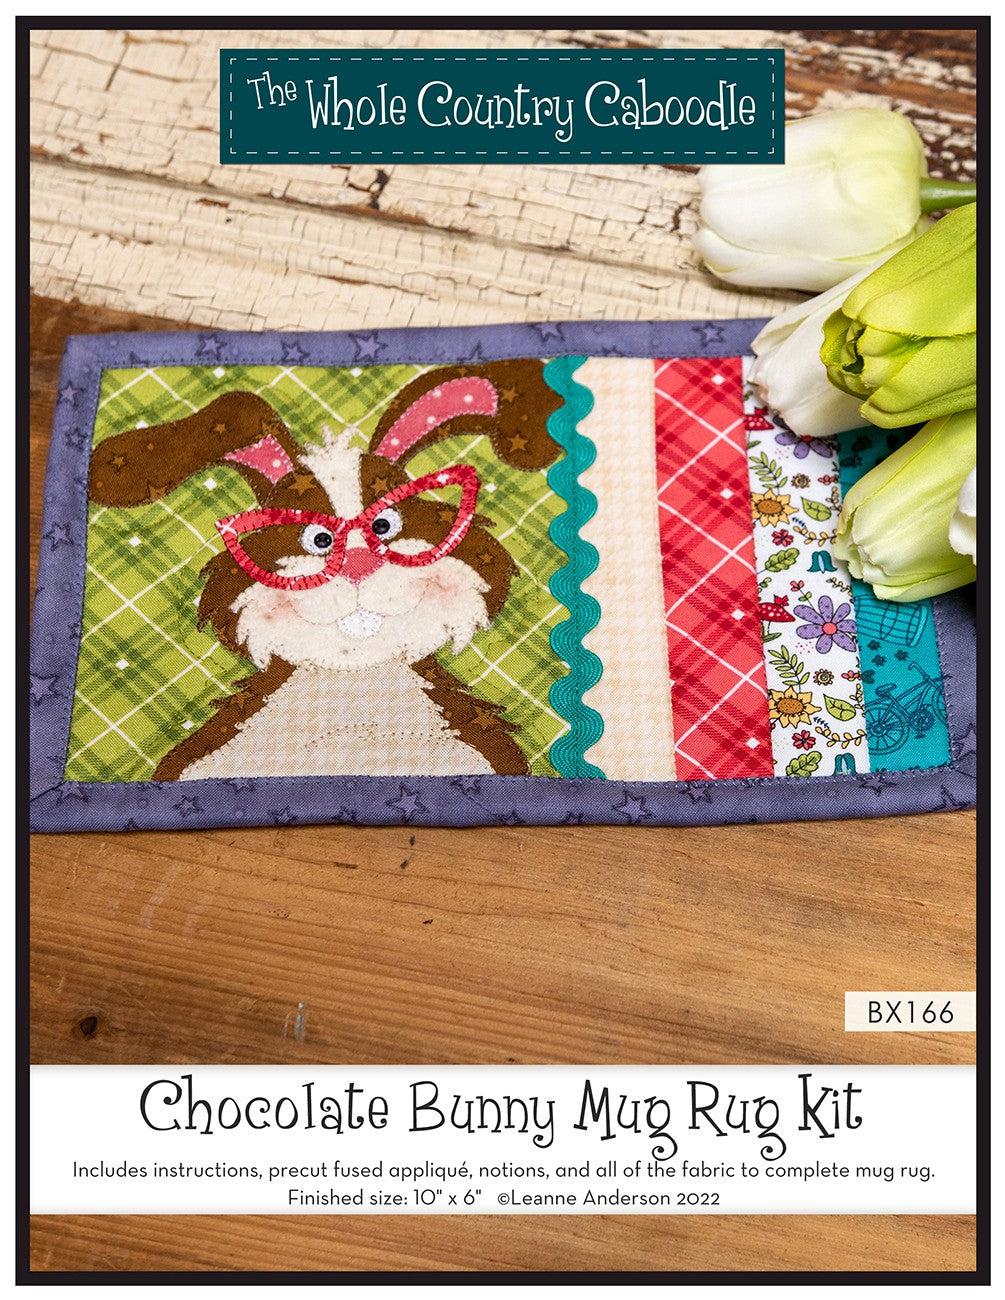 Chocolate Bunny Mug Rug Kit-The Whole Country Caboodle-My Favorite Quilt Store